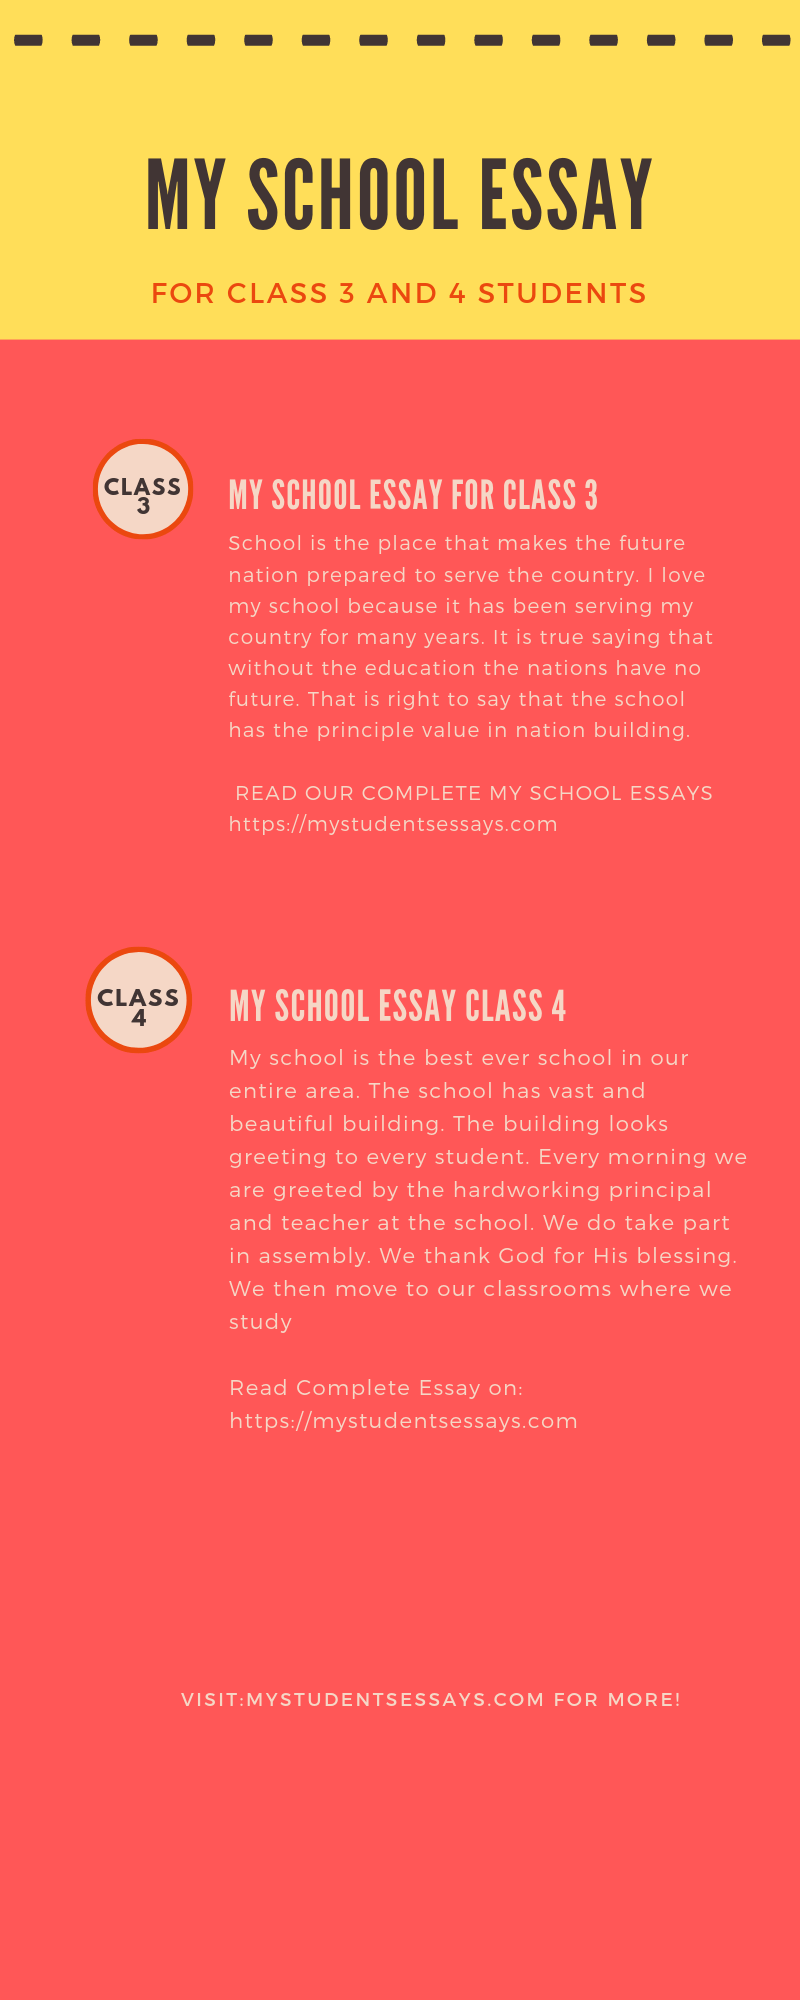 My school essay for 3rd and 4th class students